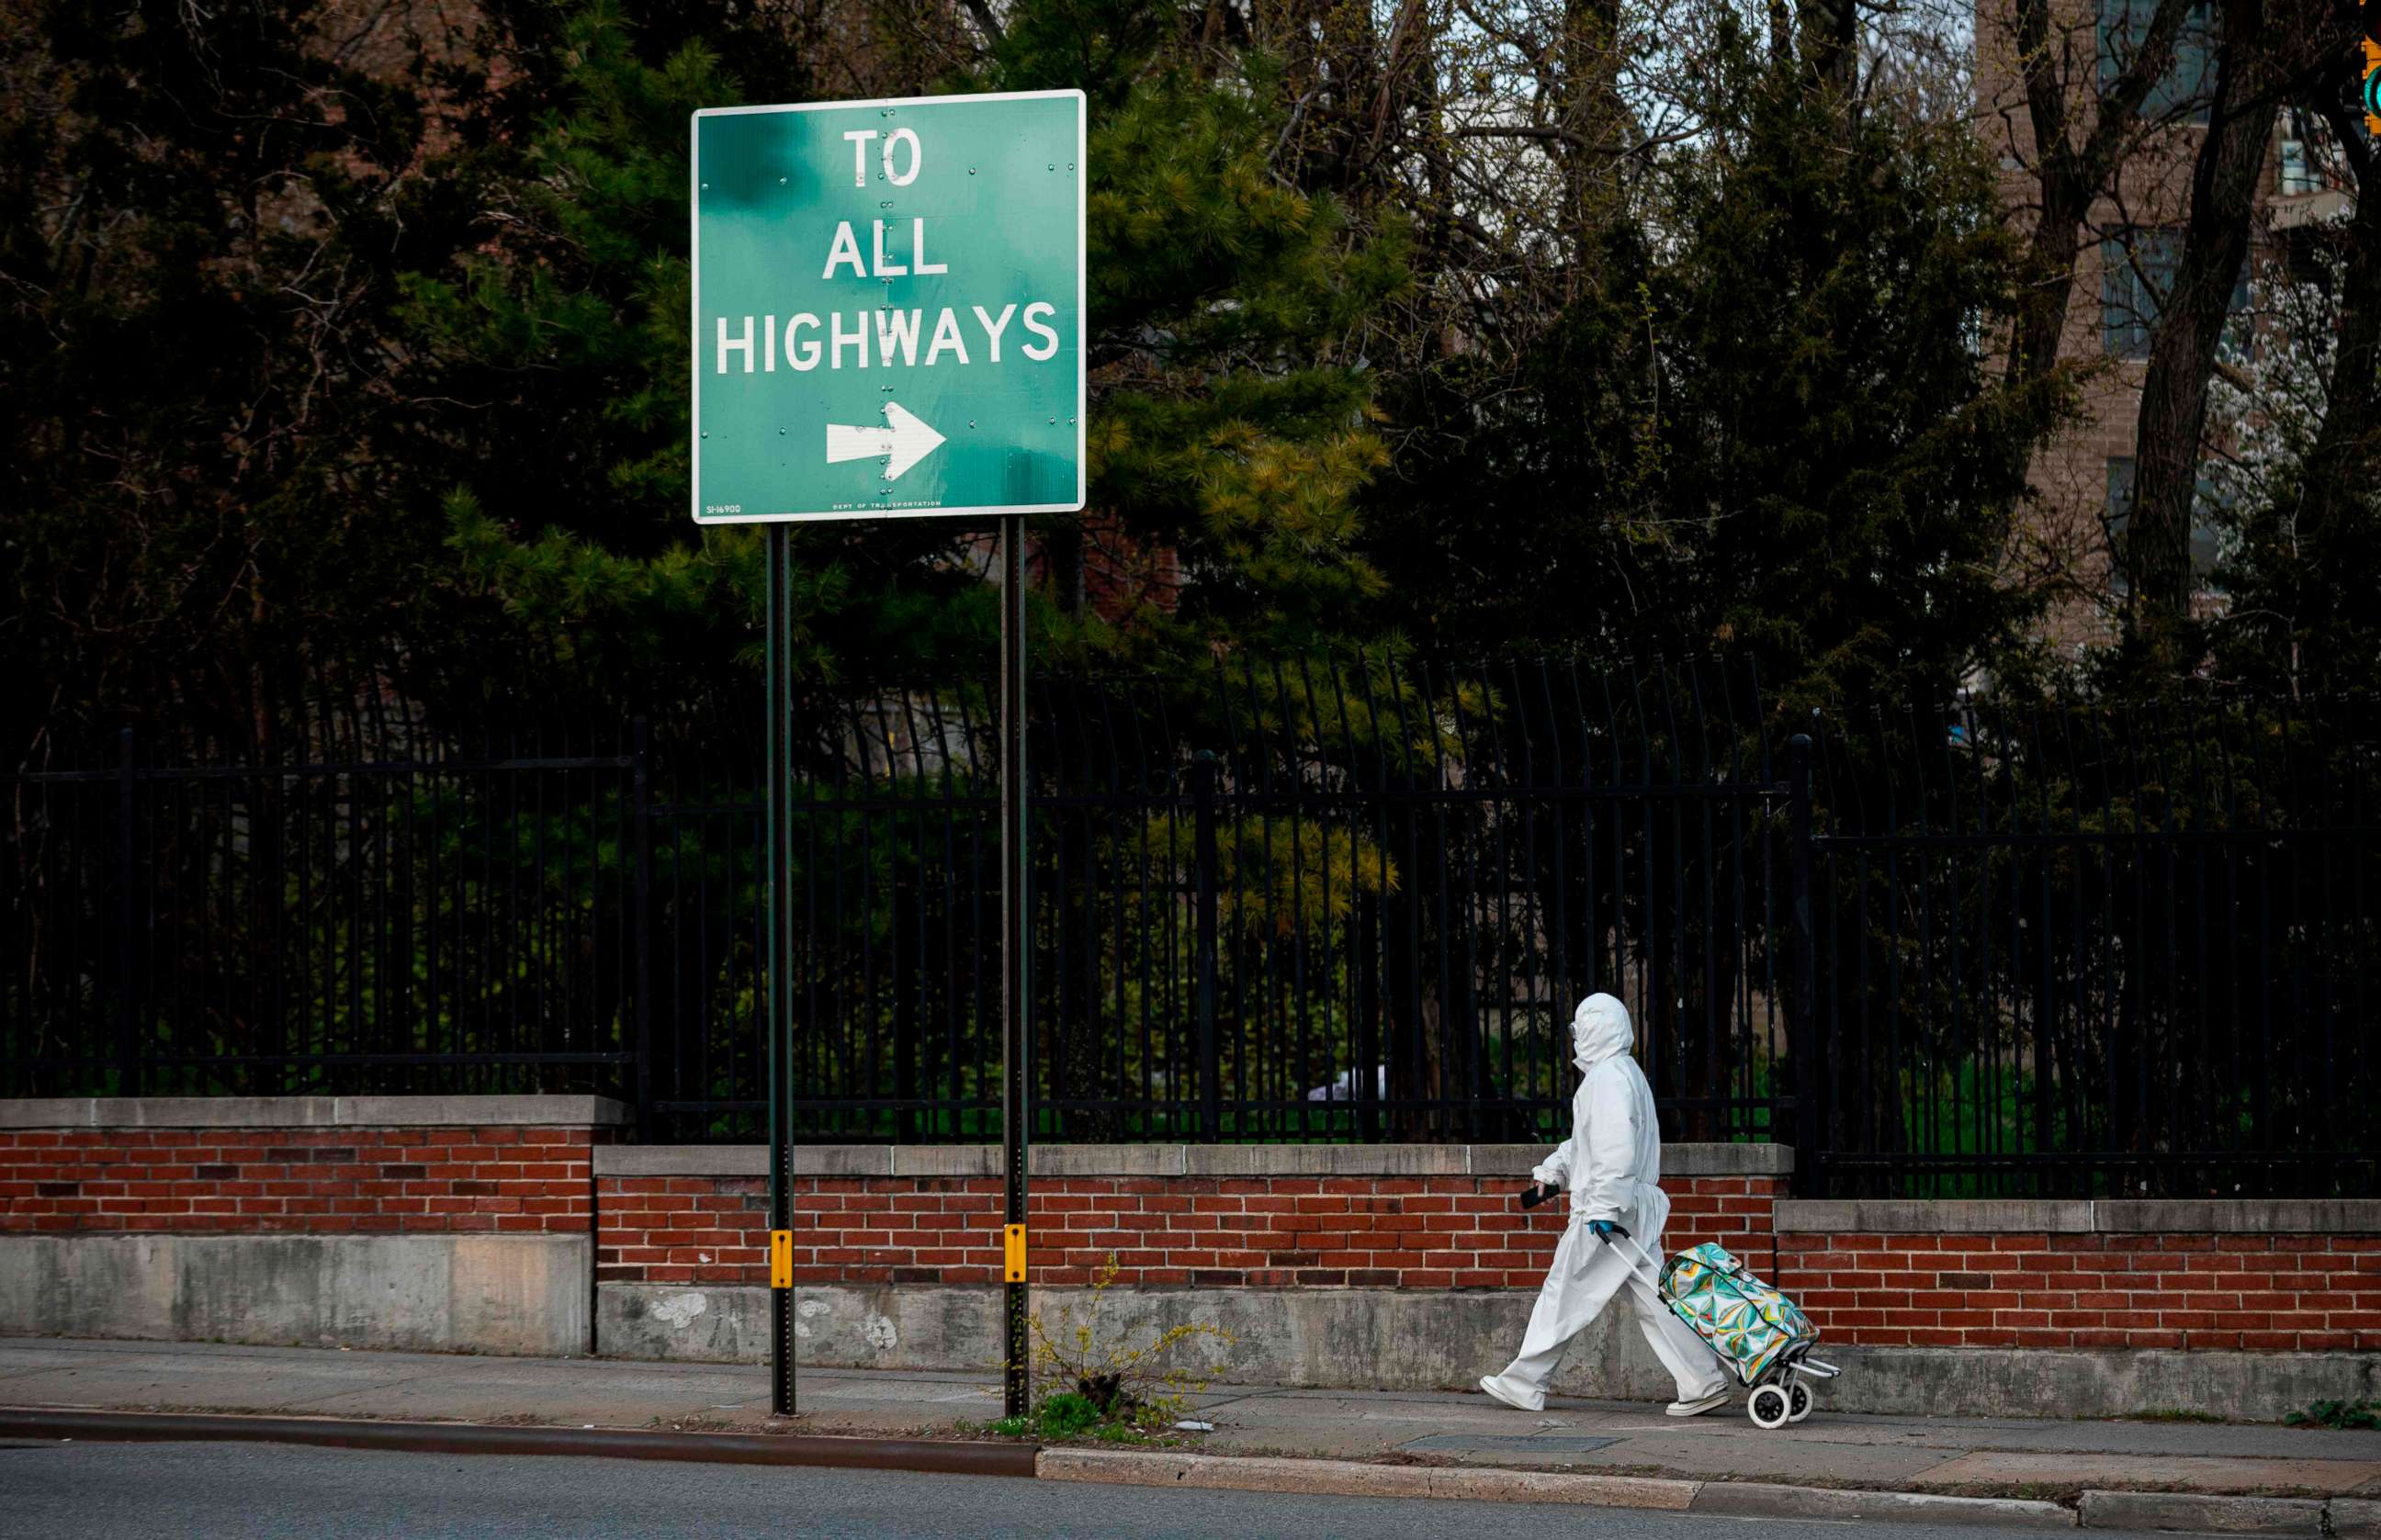 PHOTO: A woman wearing a hazmat suit and googles pulls her grocery cart in the streets of Queens, a borough of New York City, amid the coronavirus pandemic on April 20, 2020.